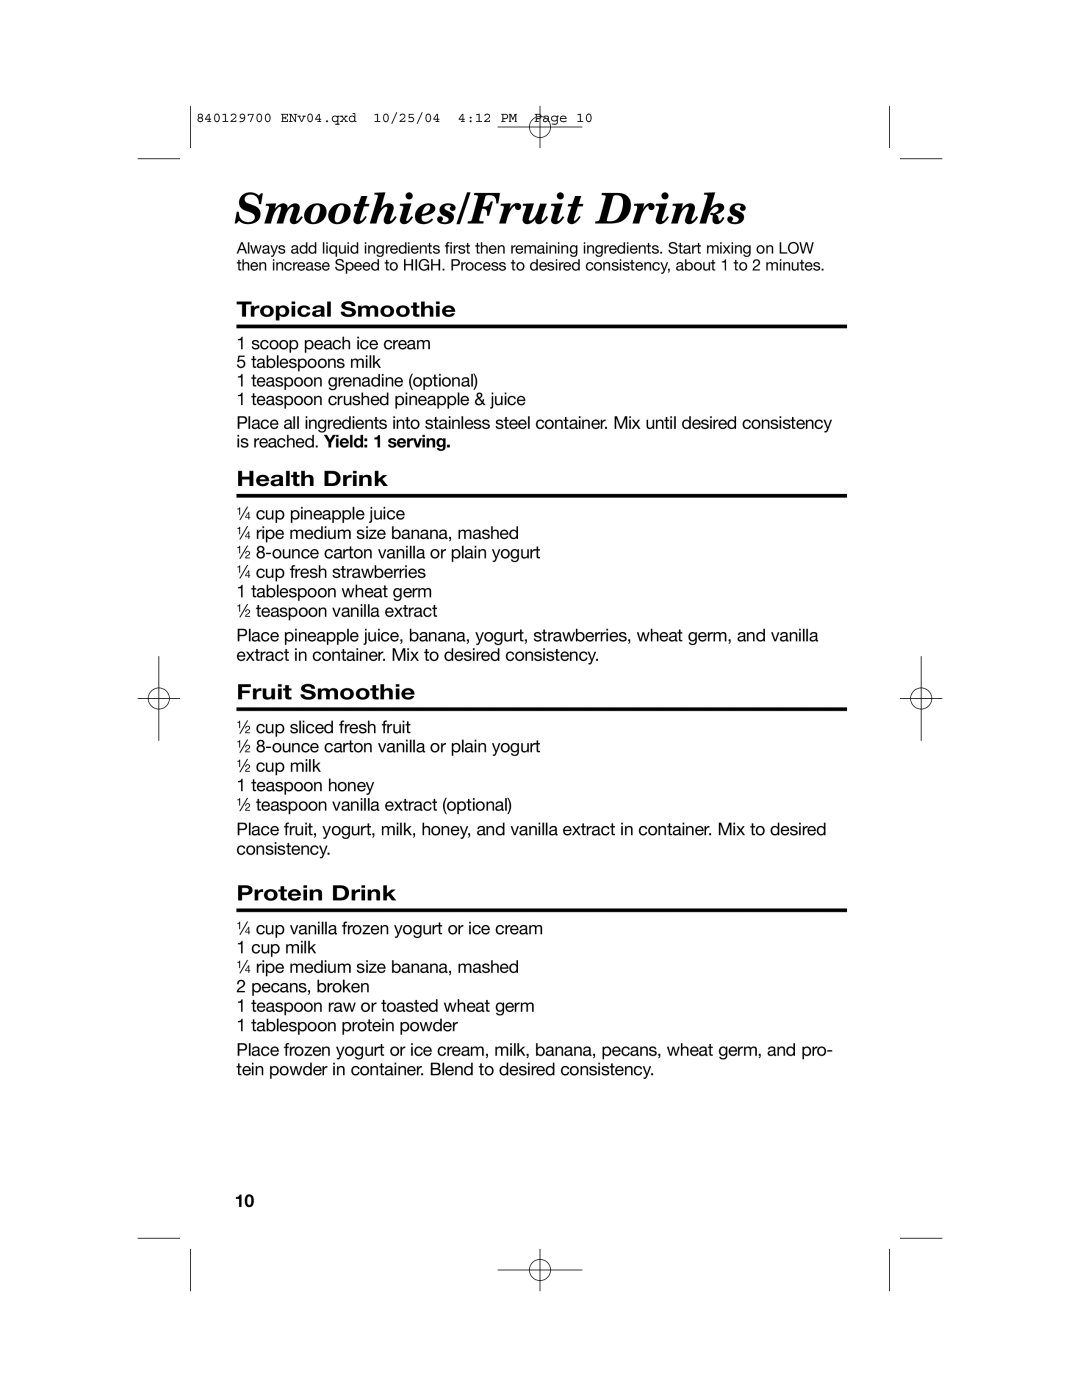 Hamilton Beach Drink Mixer manual Tropical Smoothie, Health Drink, Fruit Smoothie, Protein Drink, Smoothies/Fruit Drinks 